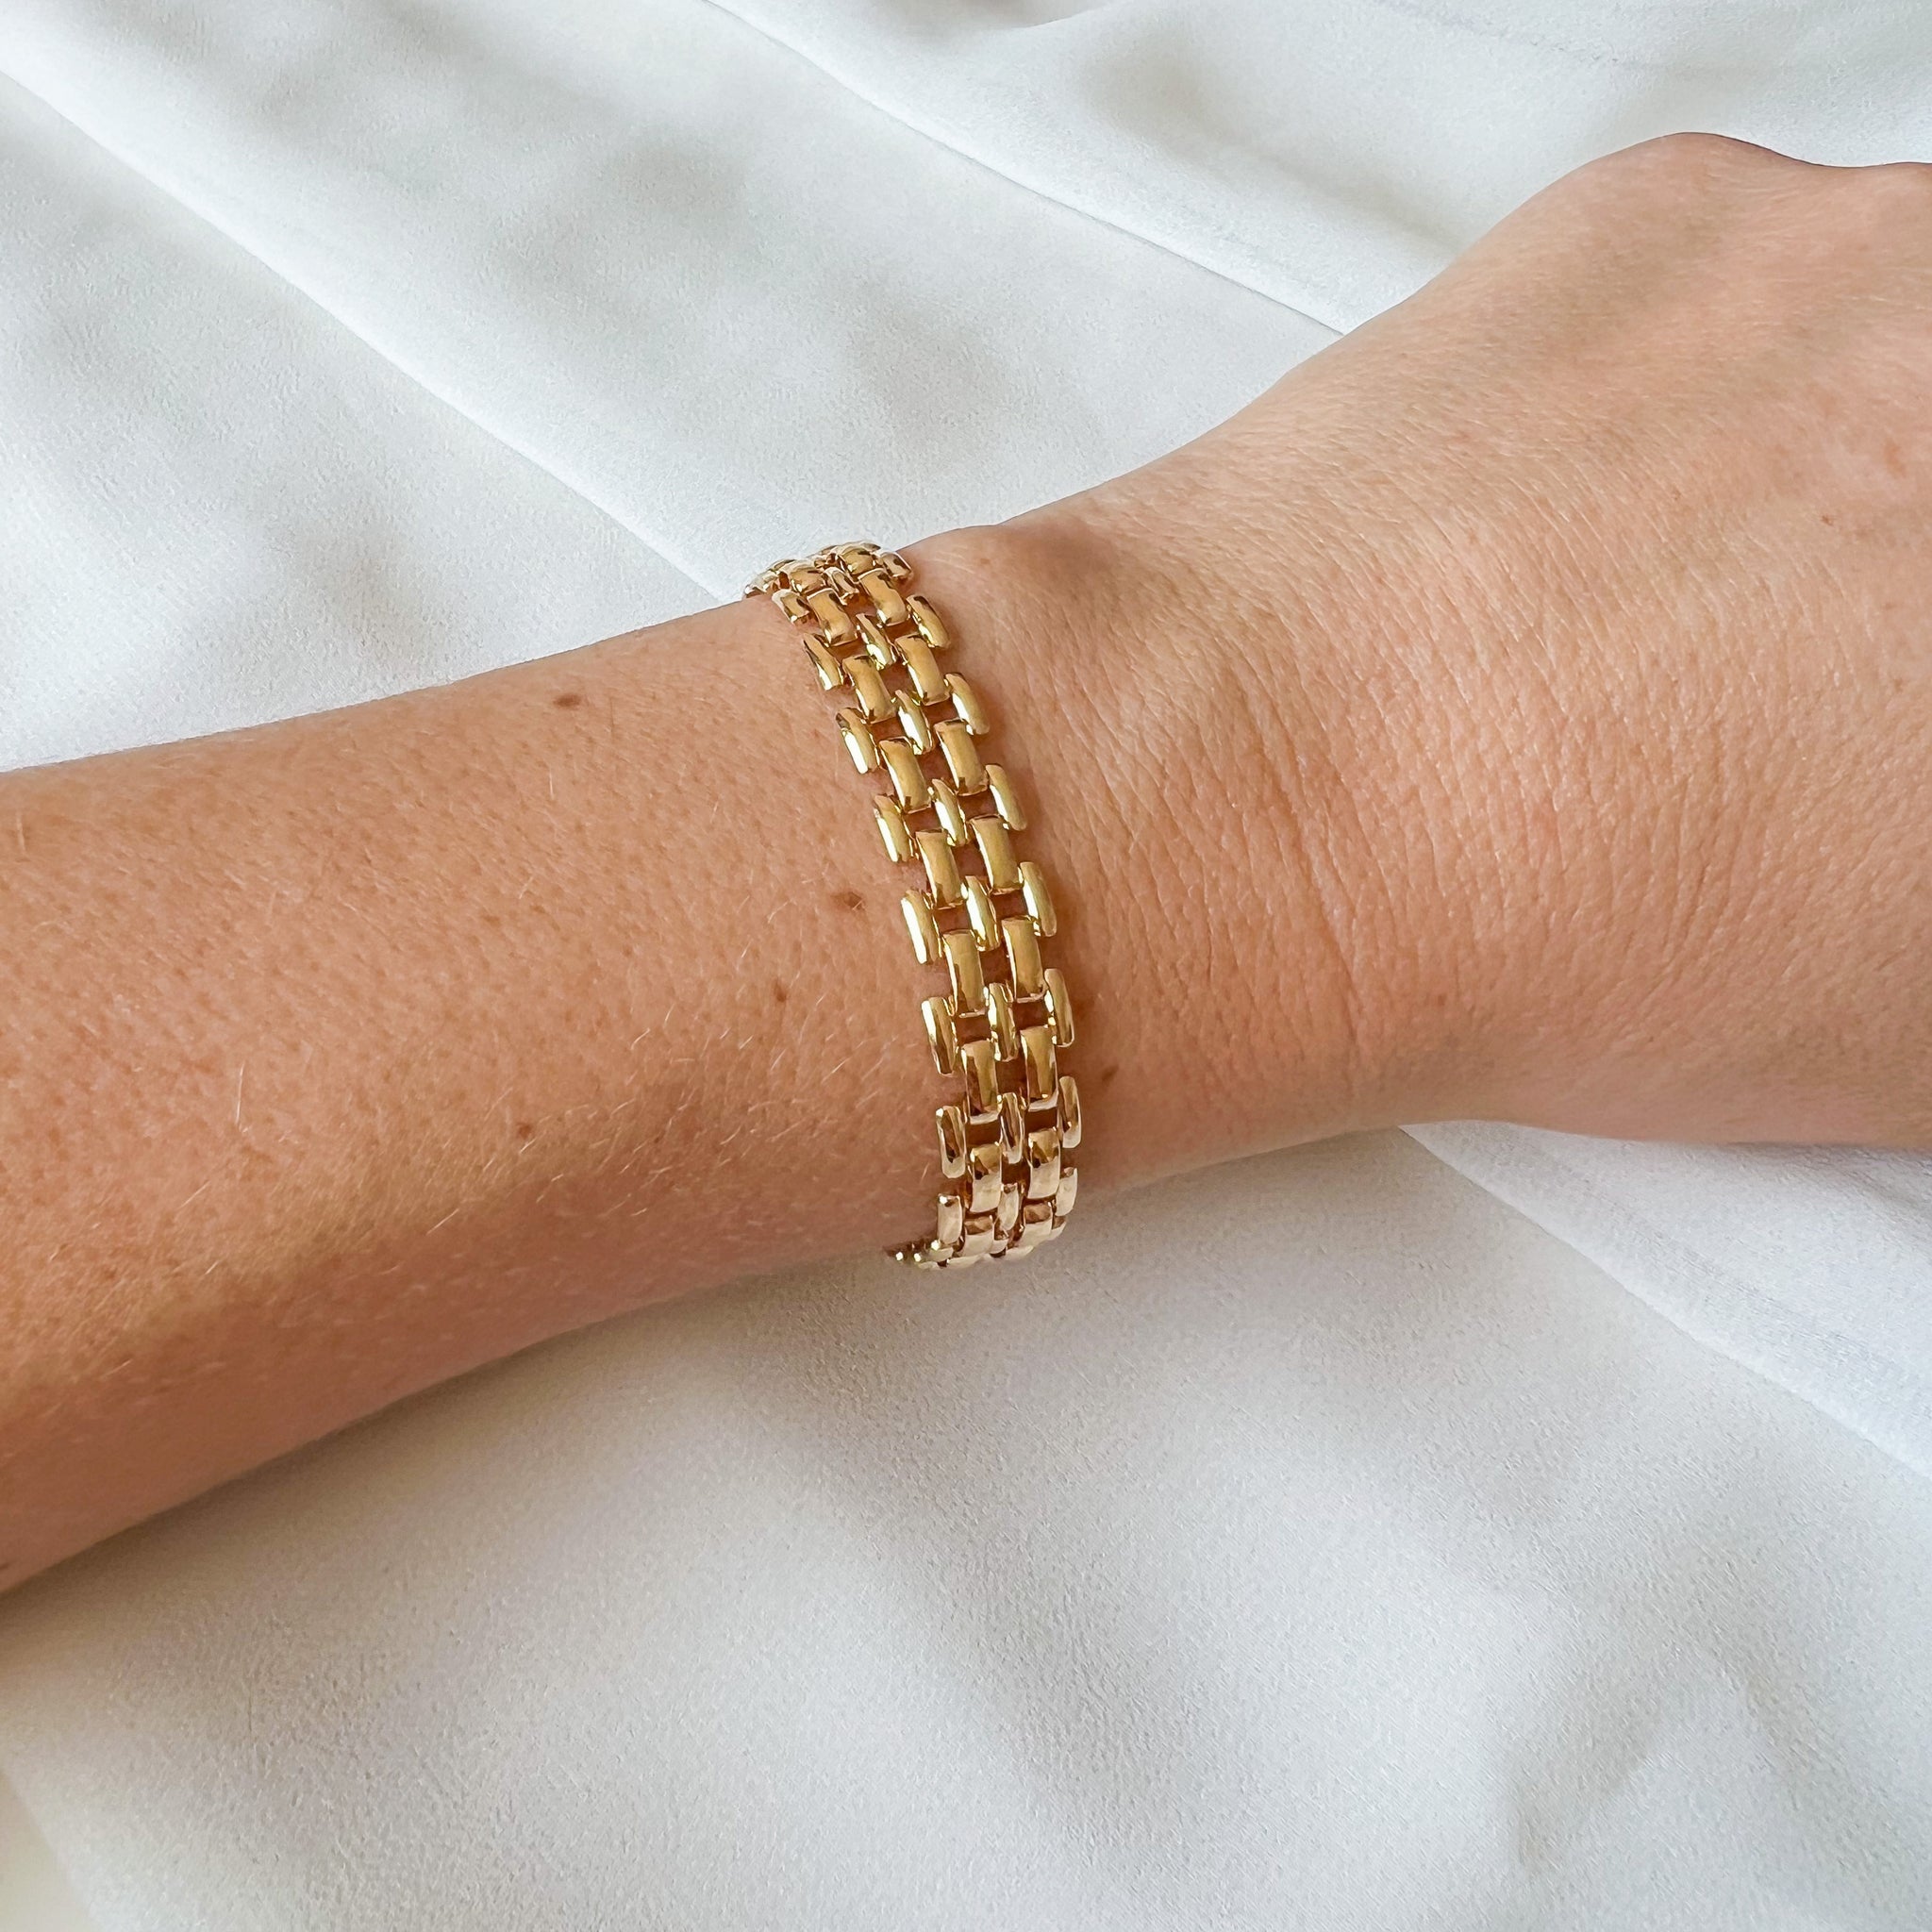 18k Gold Plated Two Tone Watch Band Bracelet Silver and Gold Chunky Chain  Bracelet Stainless Steel and 18k Gold Plated Bracelet - Etsy